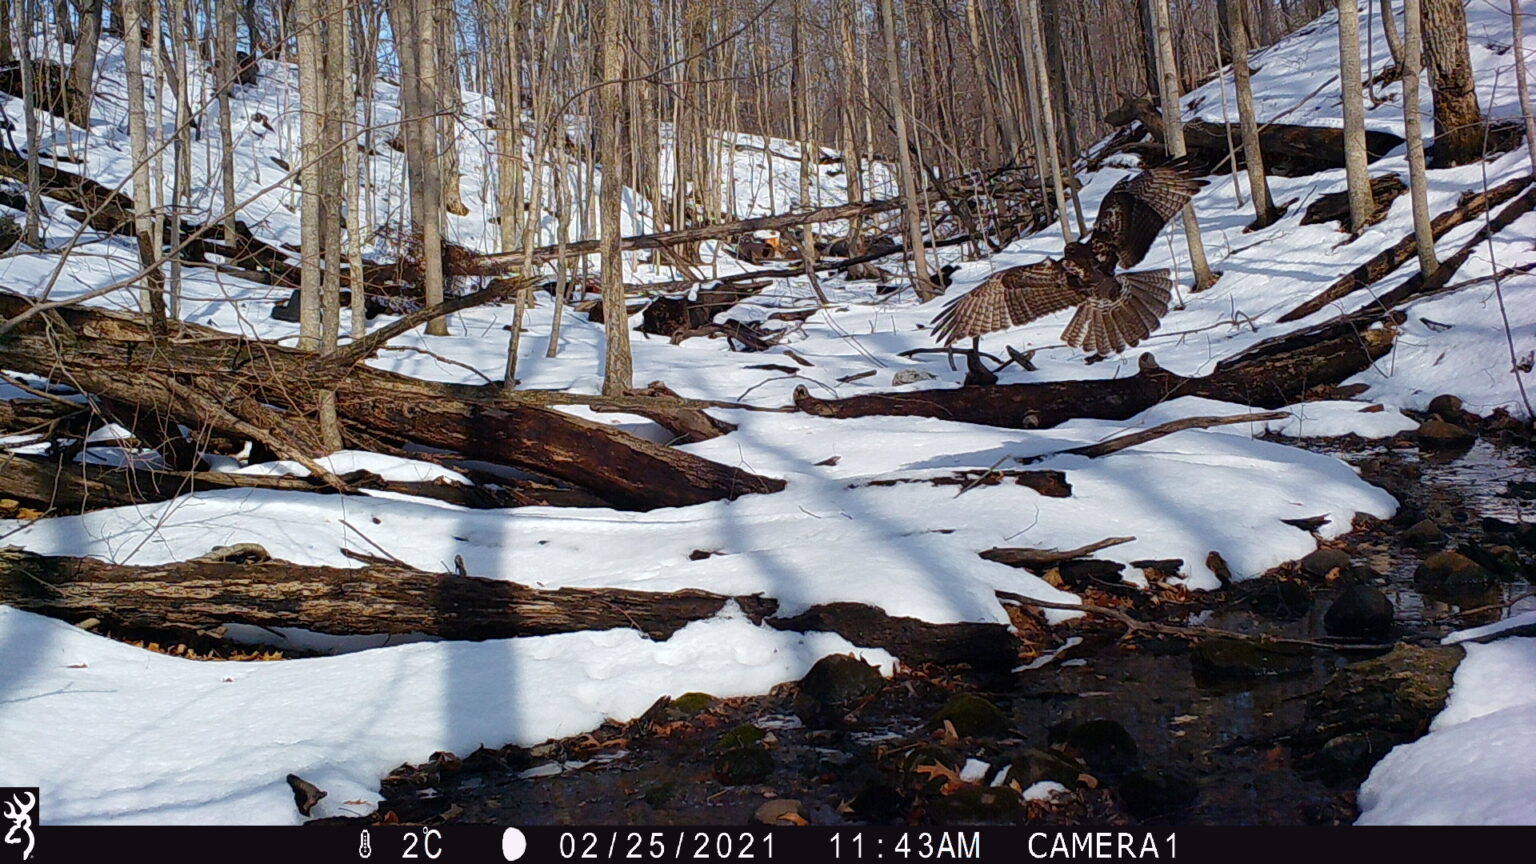 A hawk lands in the snowy woods